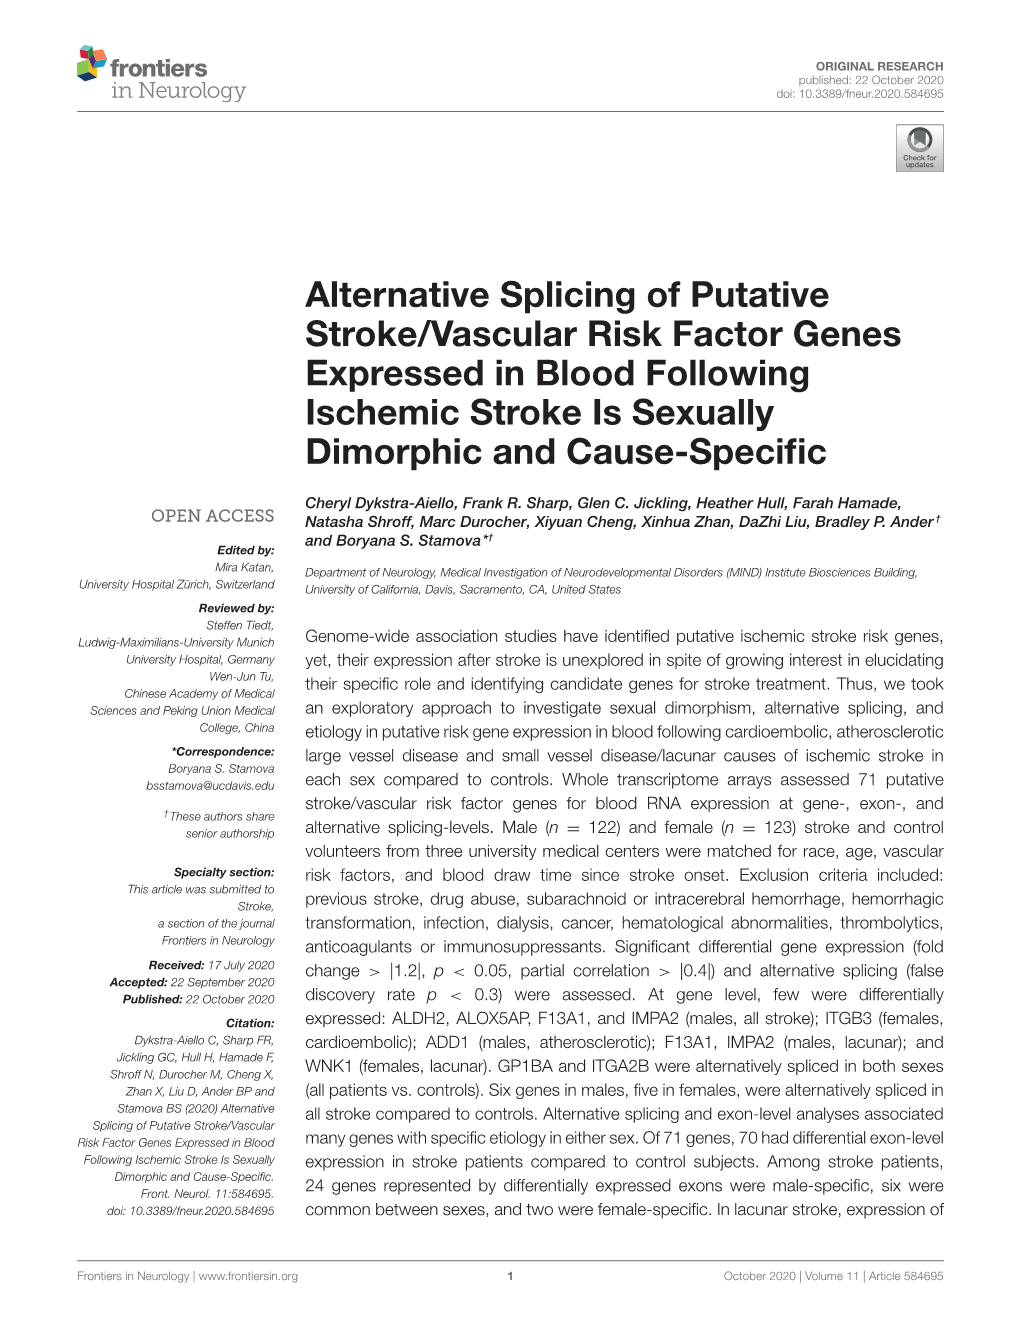 Alternative Splicing of Putative Stroke/Vascular Risk Factor Genes Expressed in Blood Following Ischemic Stroke Is Sexually Dimorphic and Cause-Speciﬁc